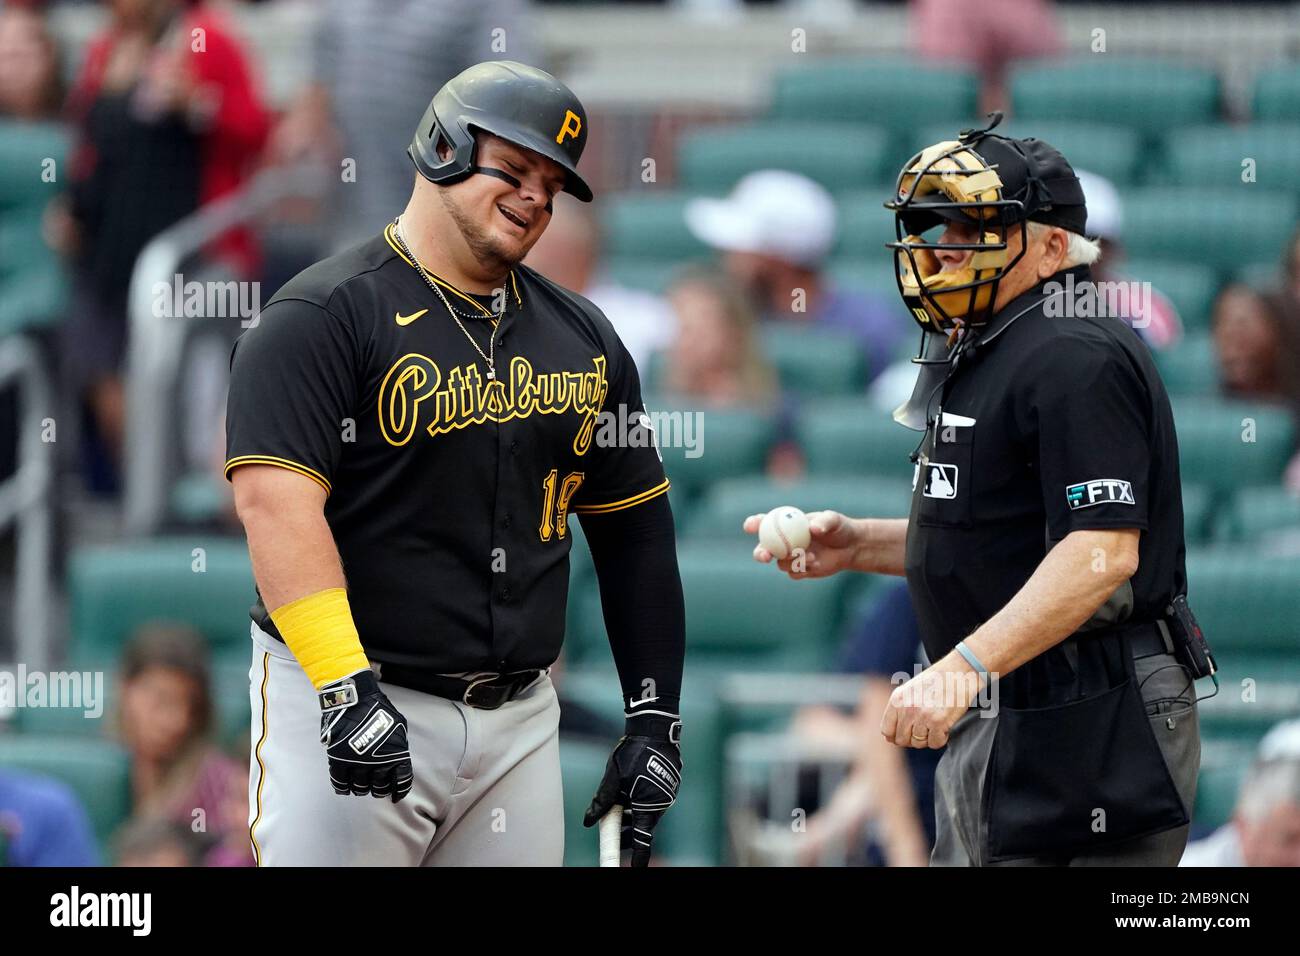 Pittsburgh Pirates' Daniel Vogelbach reacts after a called third